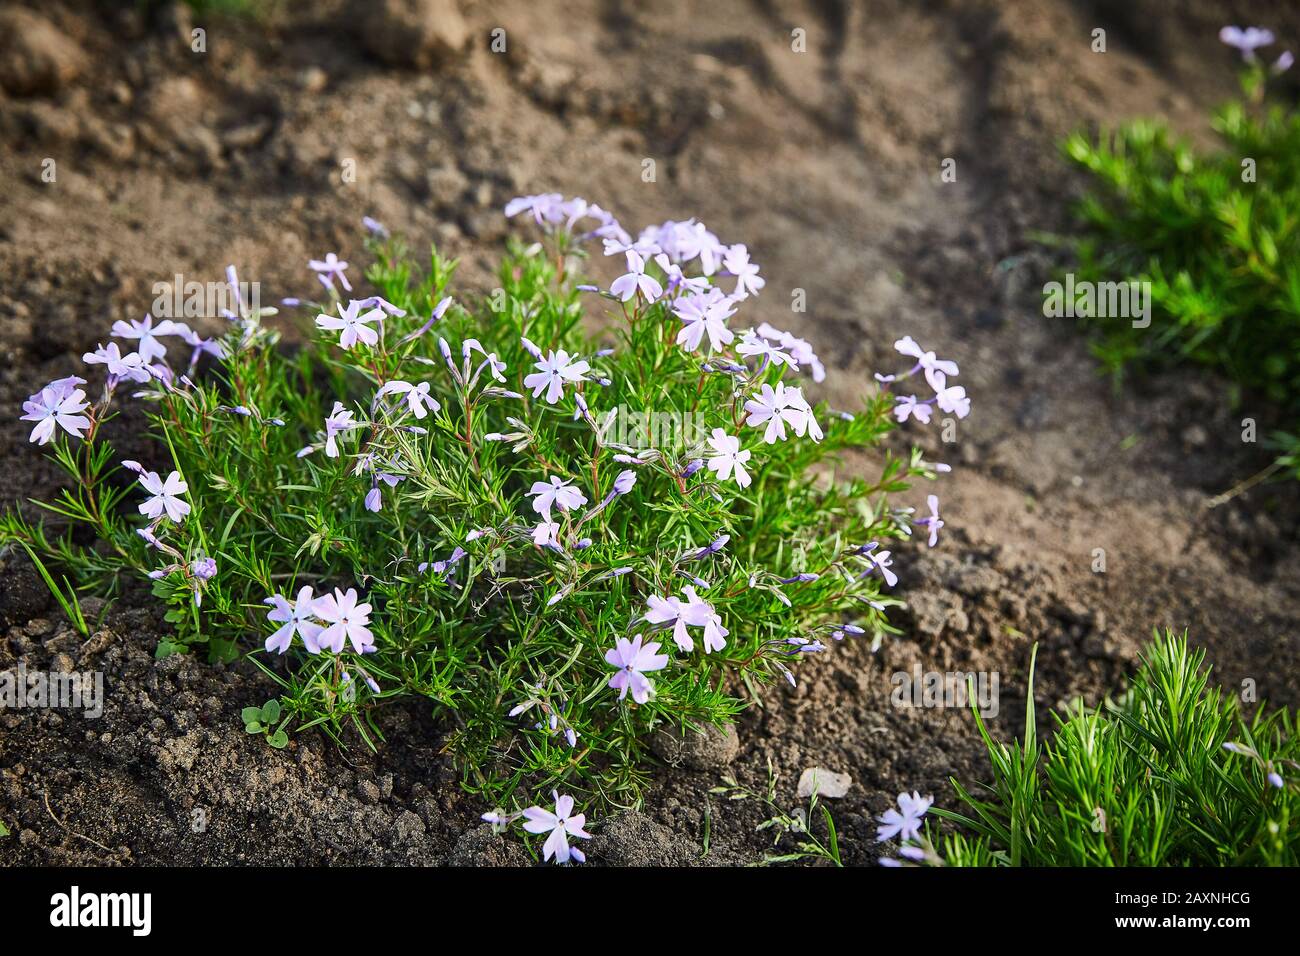 Coleonema album blooming bush in the soil on a summer day. Stock Photo